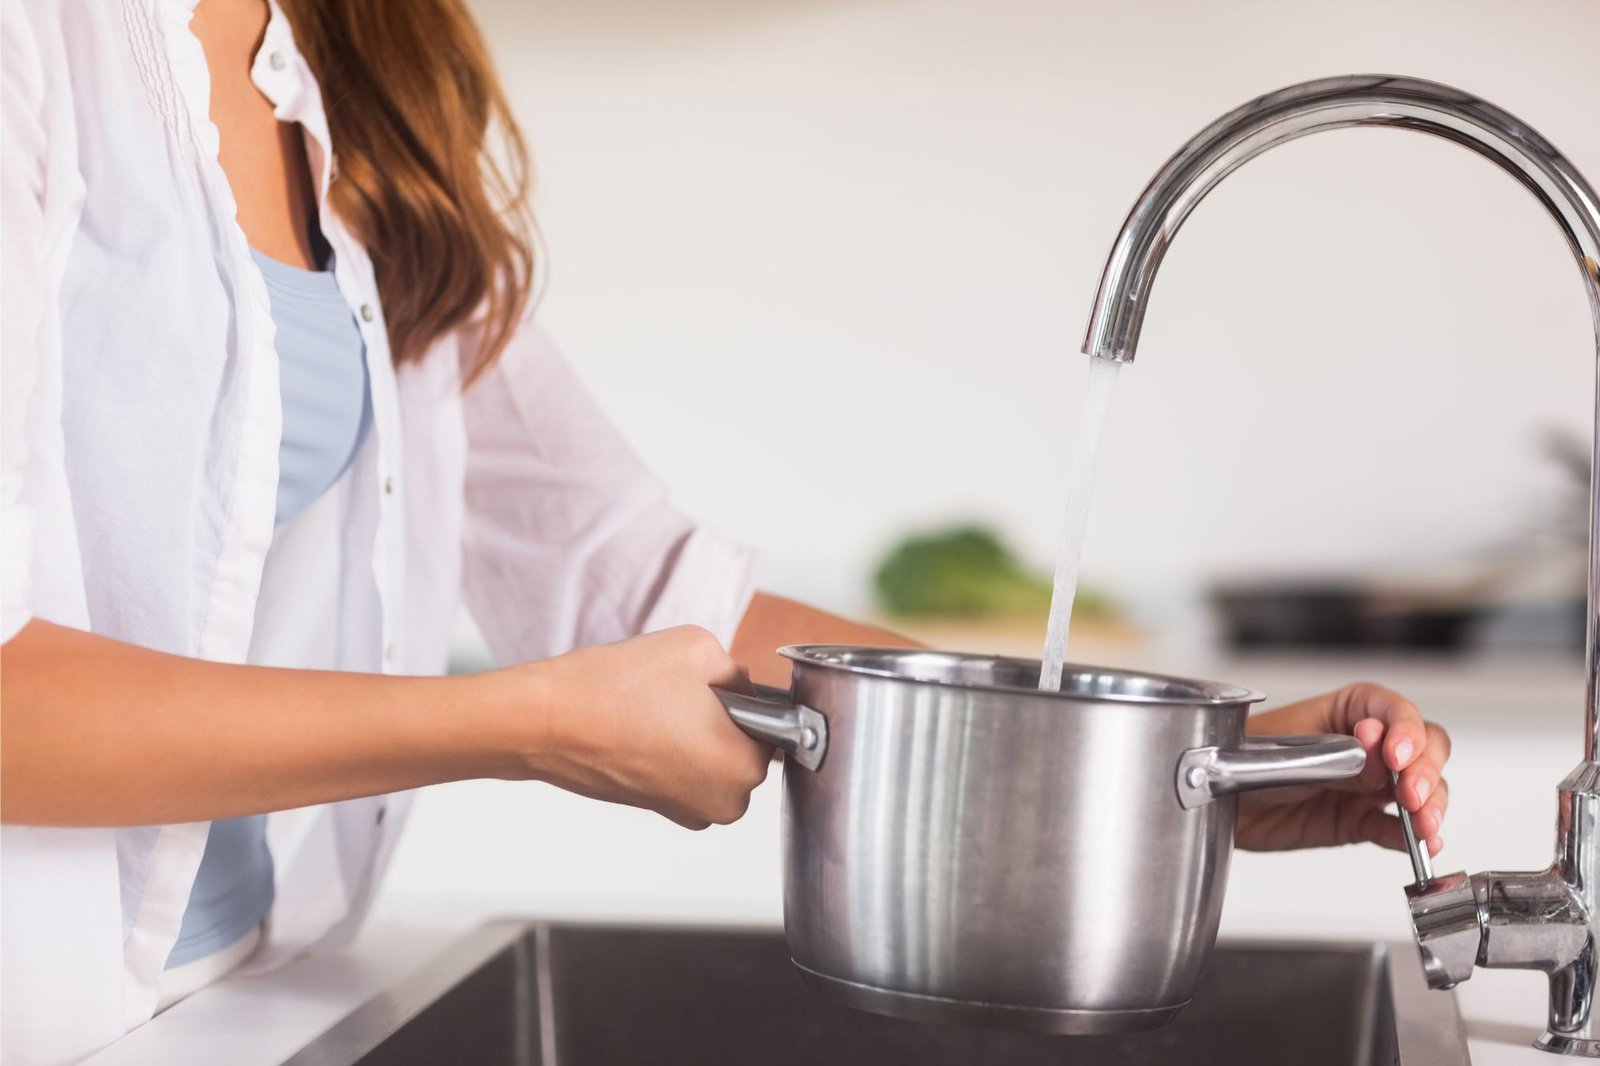 Millions Are at Risk Using High Arsenic Water for Cooking